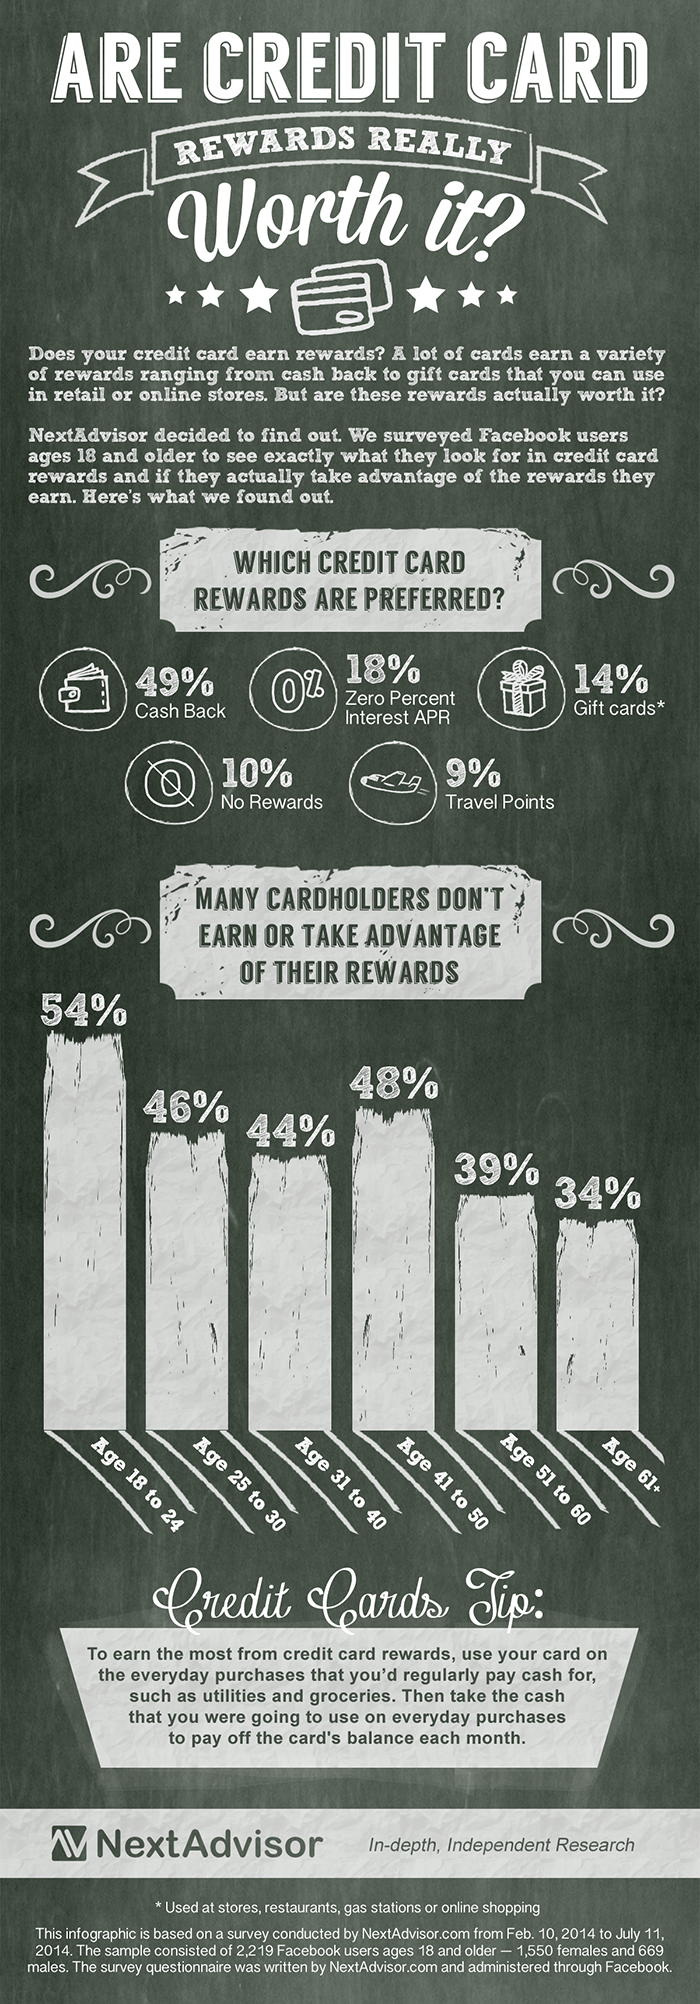 Are Credit Card Rewards Really Worth It?